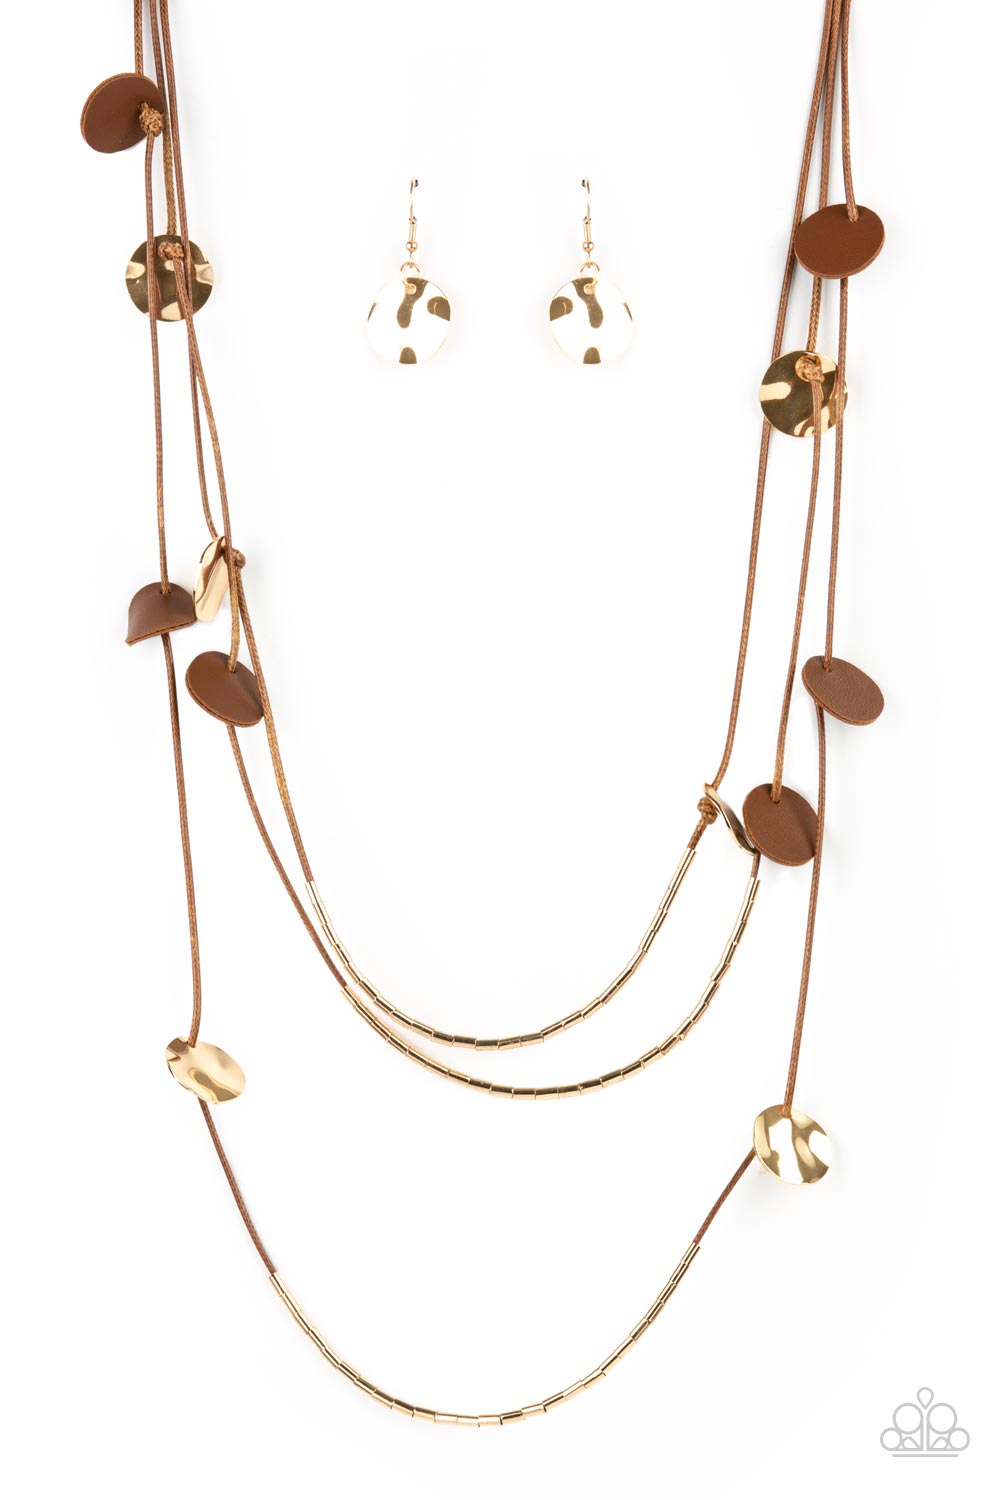 Paparazzi Necklace - Alluring Luxe - Brown